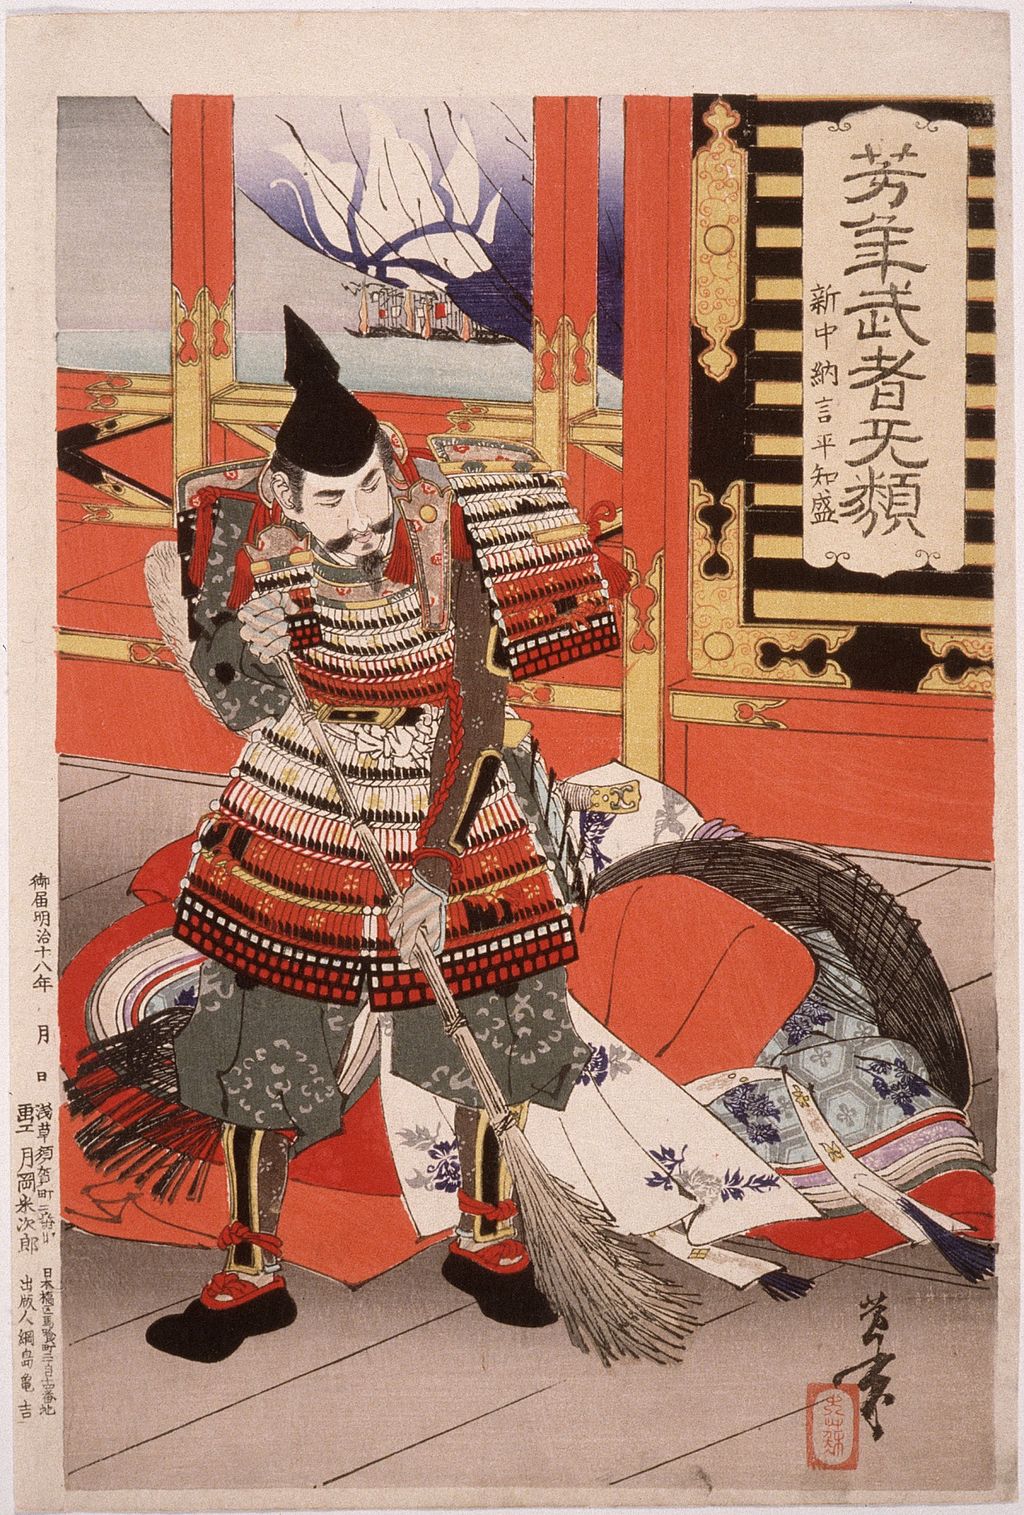 Japan, 1886, 1st month Series- Yoshitoshi's Warriors Trembling with Courage Prints; woodcuts Color woodblock print Herbert R. Cole Collection (M.84.31.97) Japanese Art